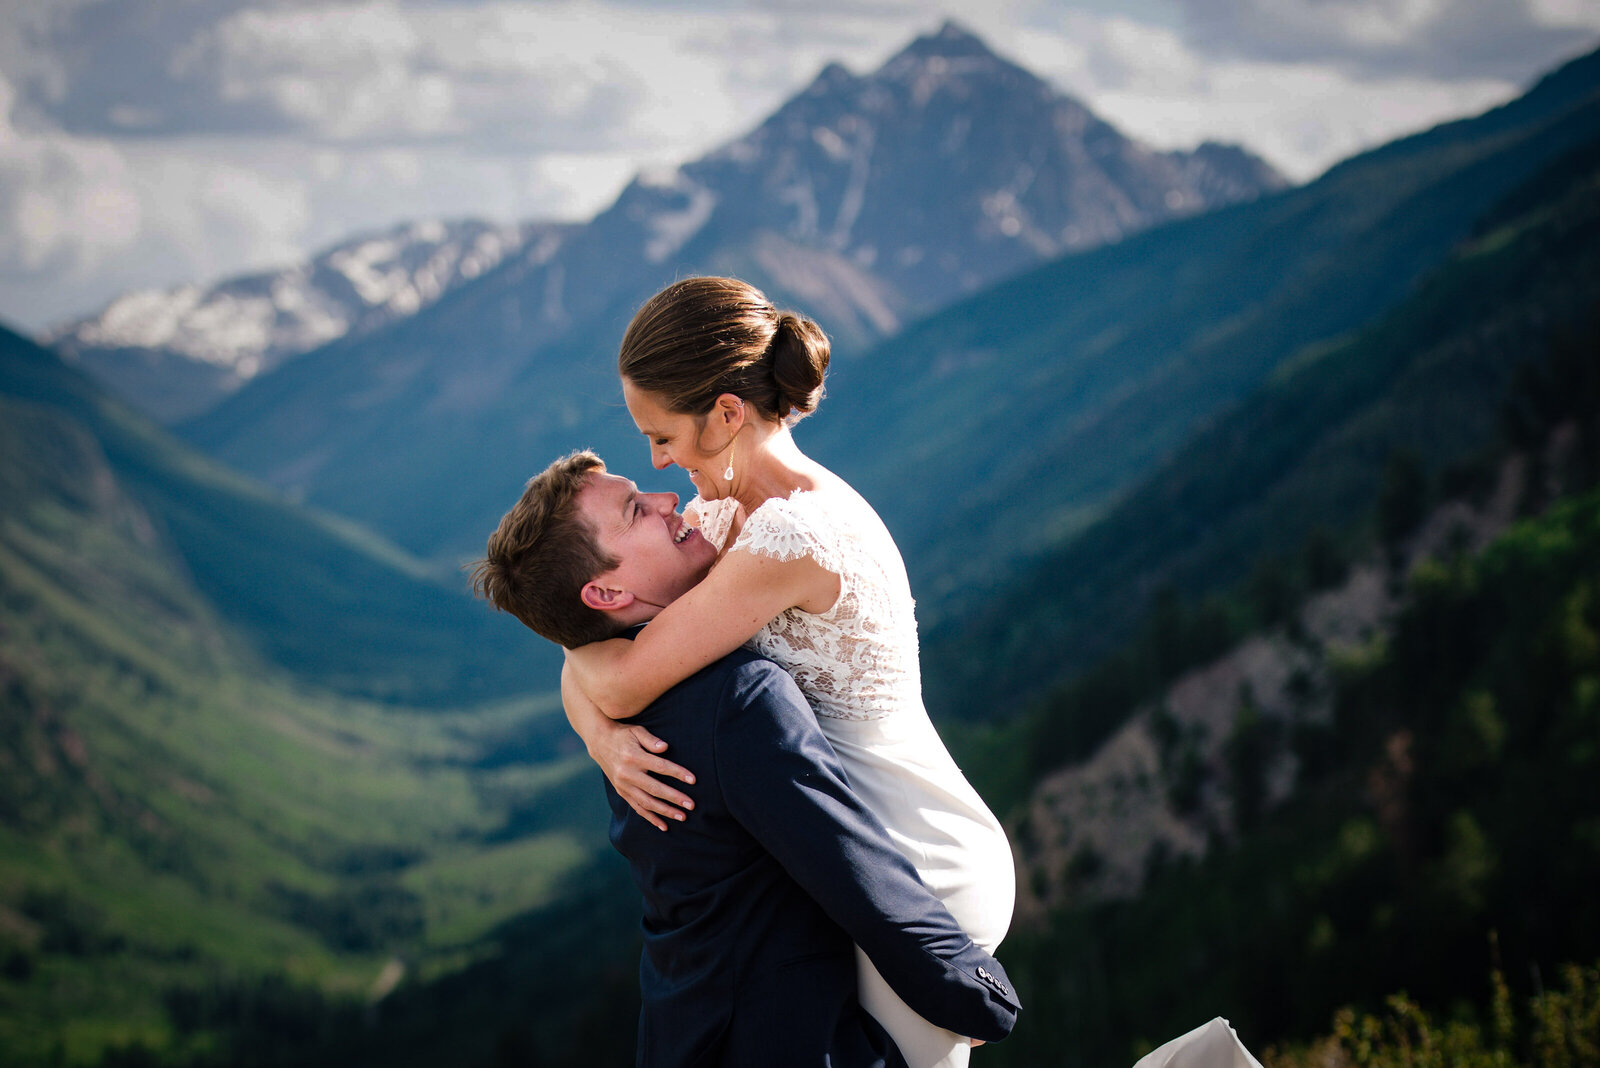 Groom picking up Bride in Front of Mountain